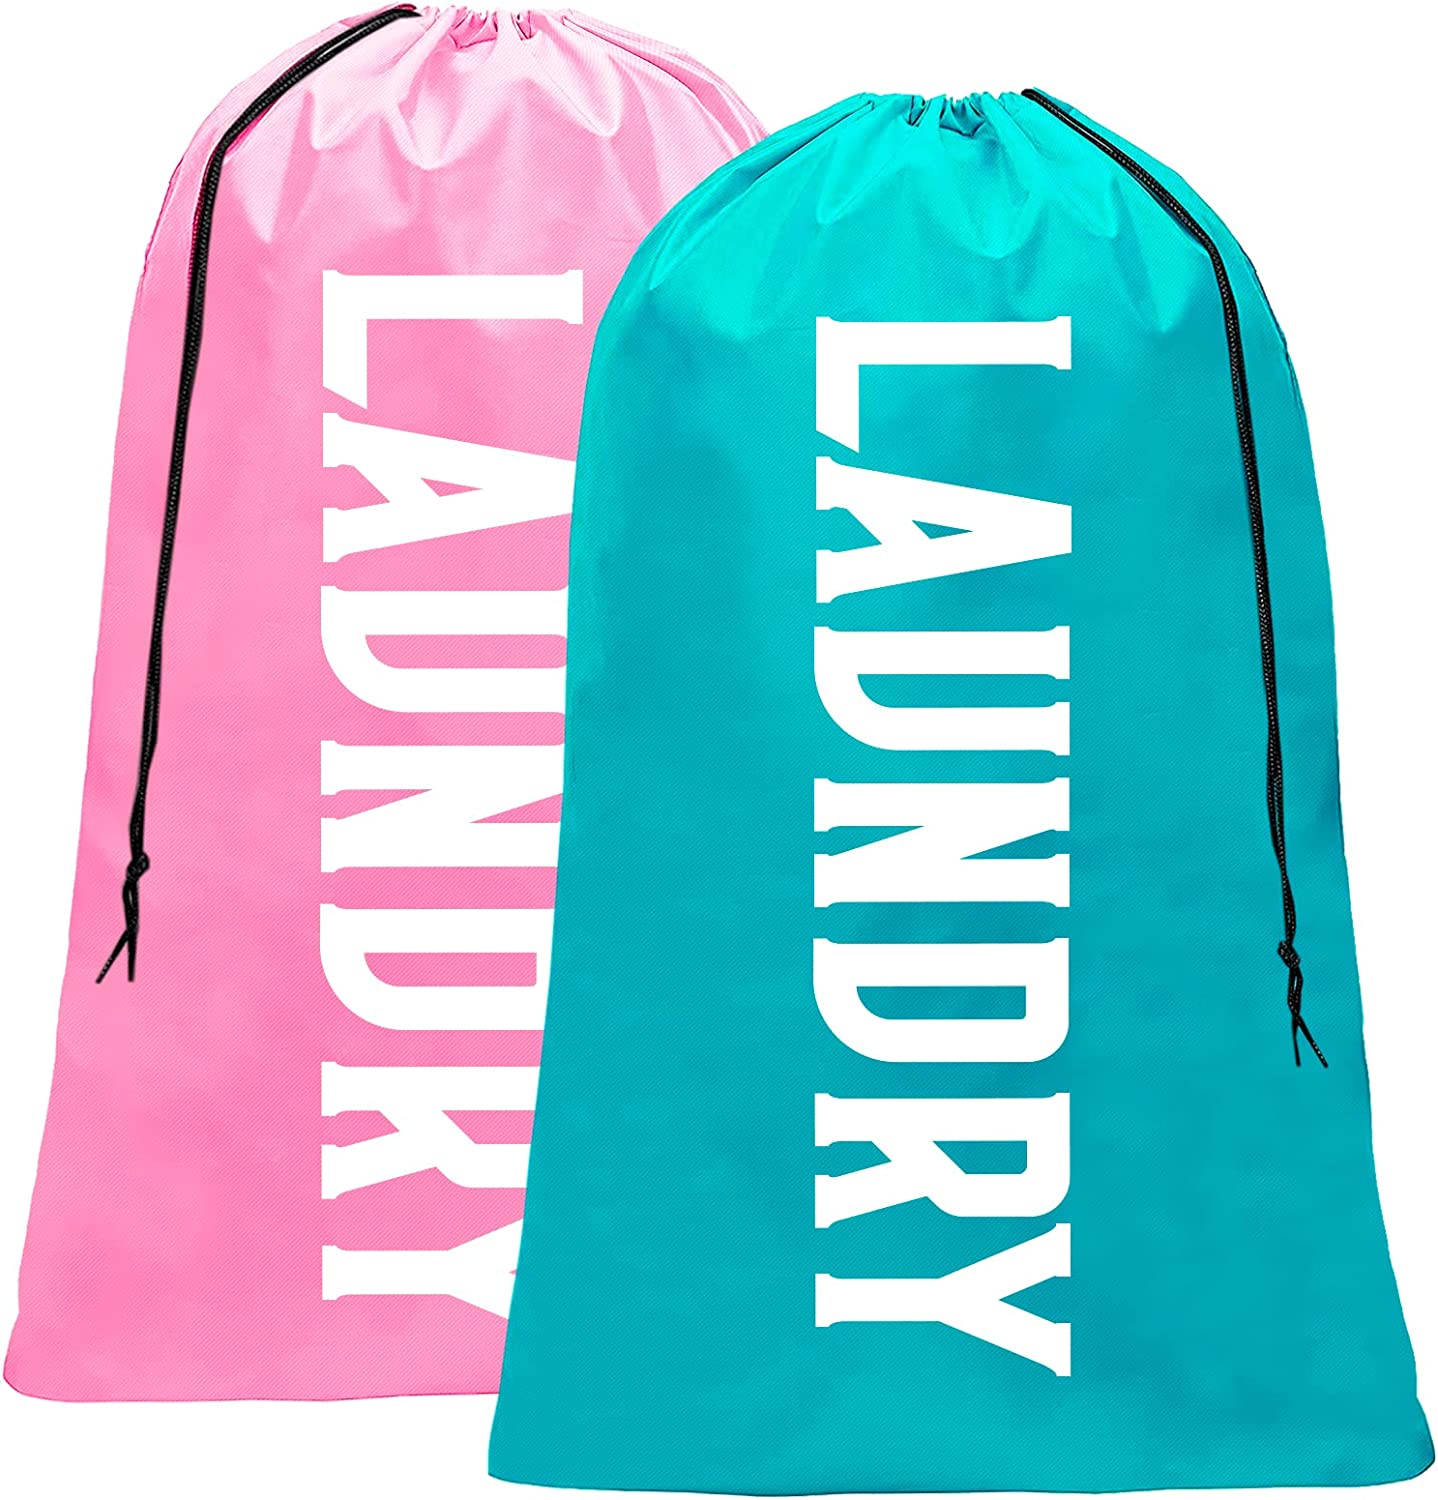 Fiodrmy Drawstring Double-Stitched Seam Laundry Bags, 2-Pack